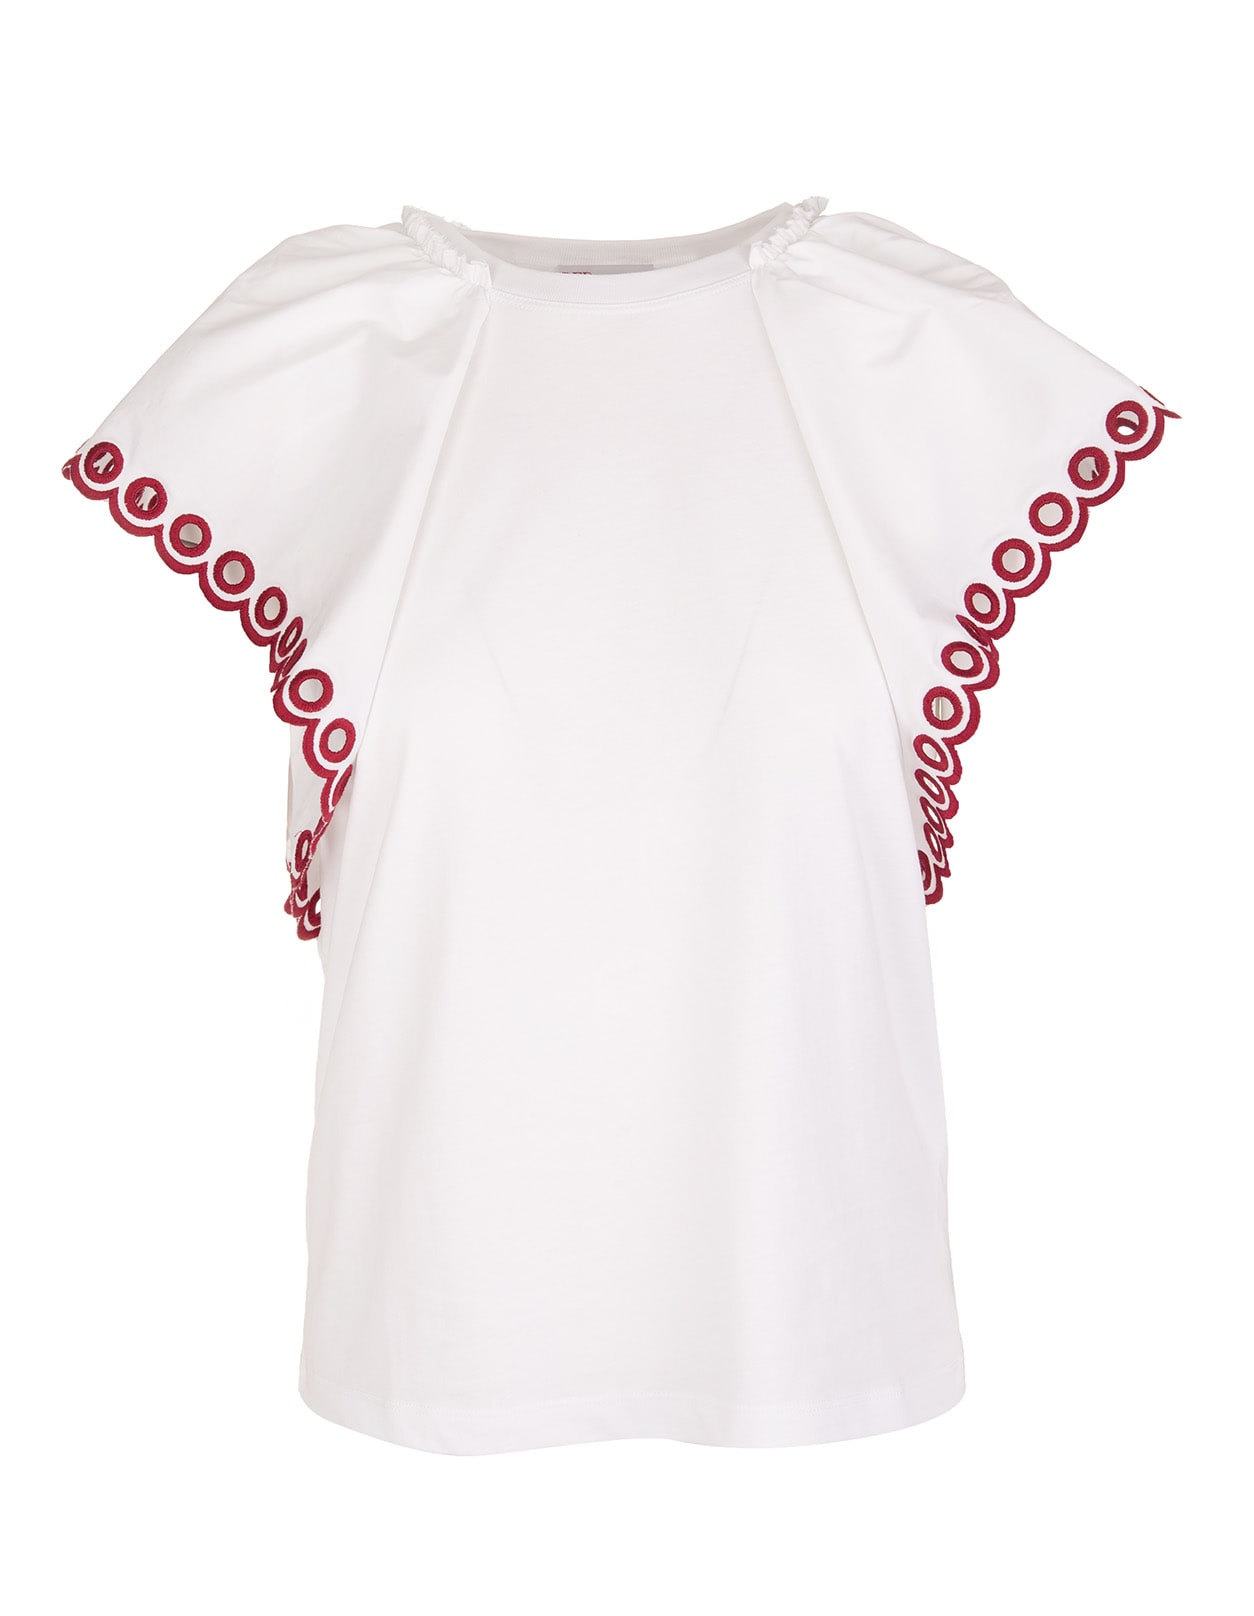 RED Valentino White T-shirt With Sangallo Embroidery